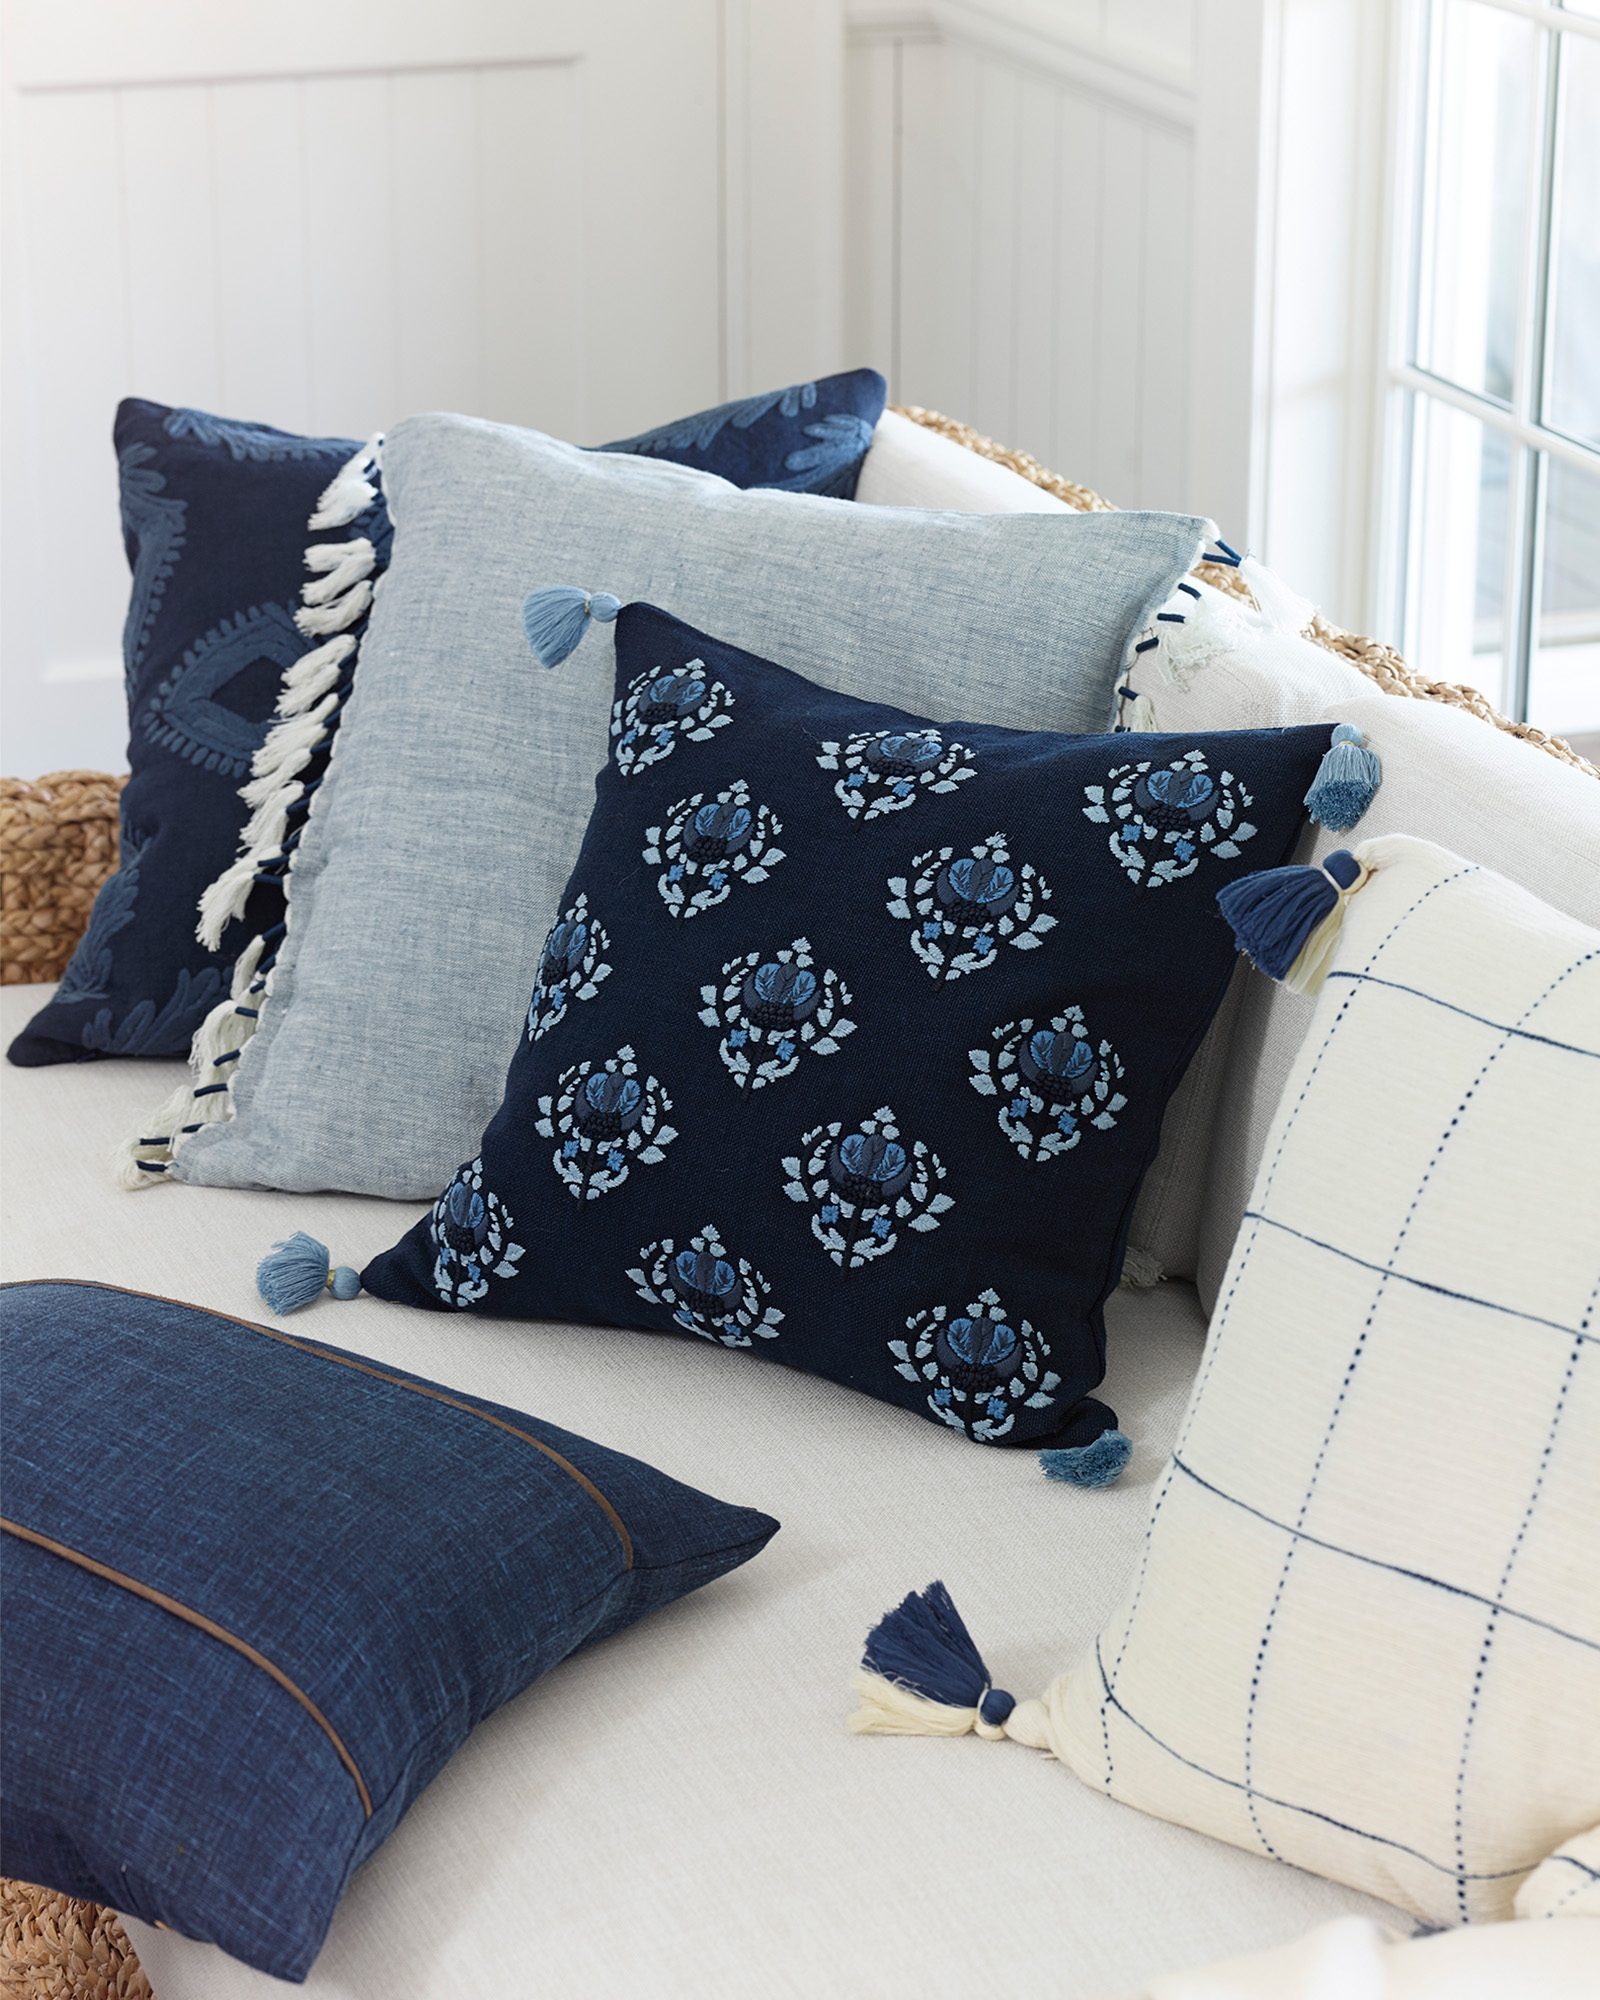 Kentfield 20" SQ Pillow Cover - Navy - Insert sold separately - Image 3